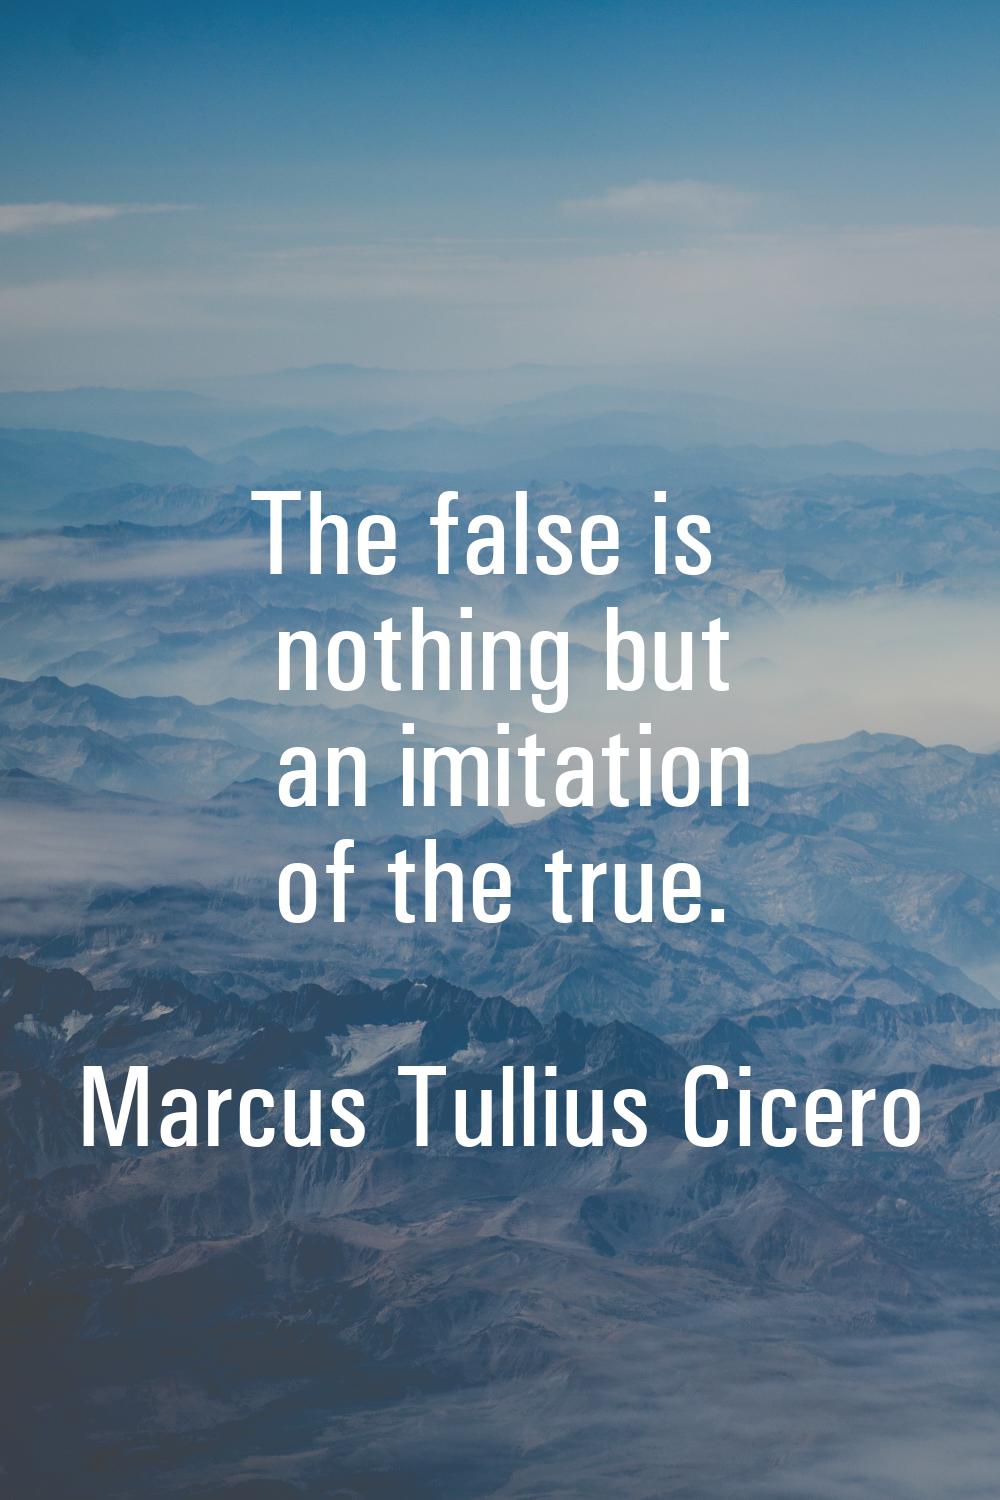 The false is nothing but an imitation of the true.